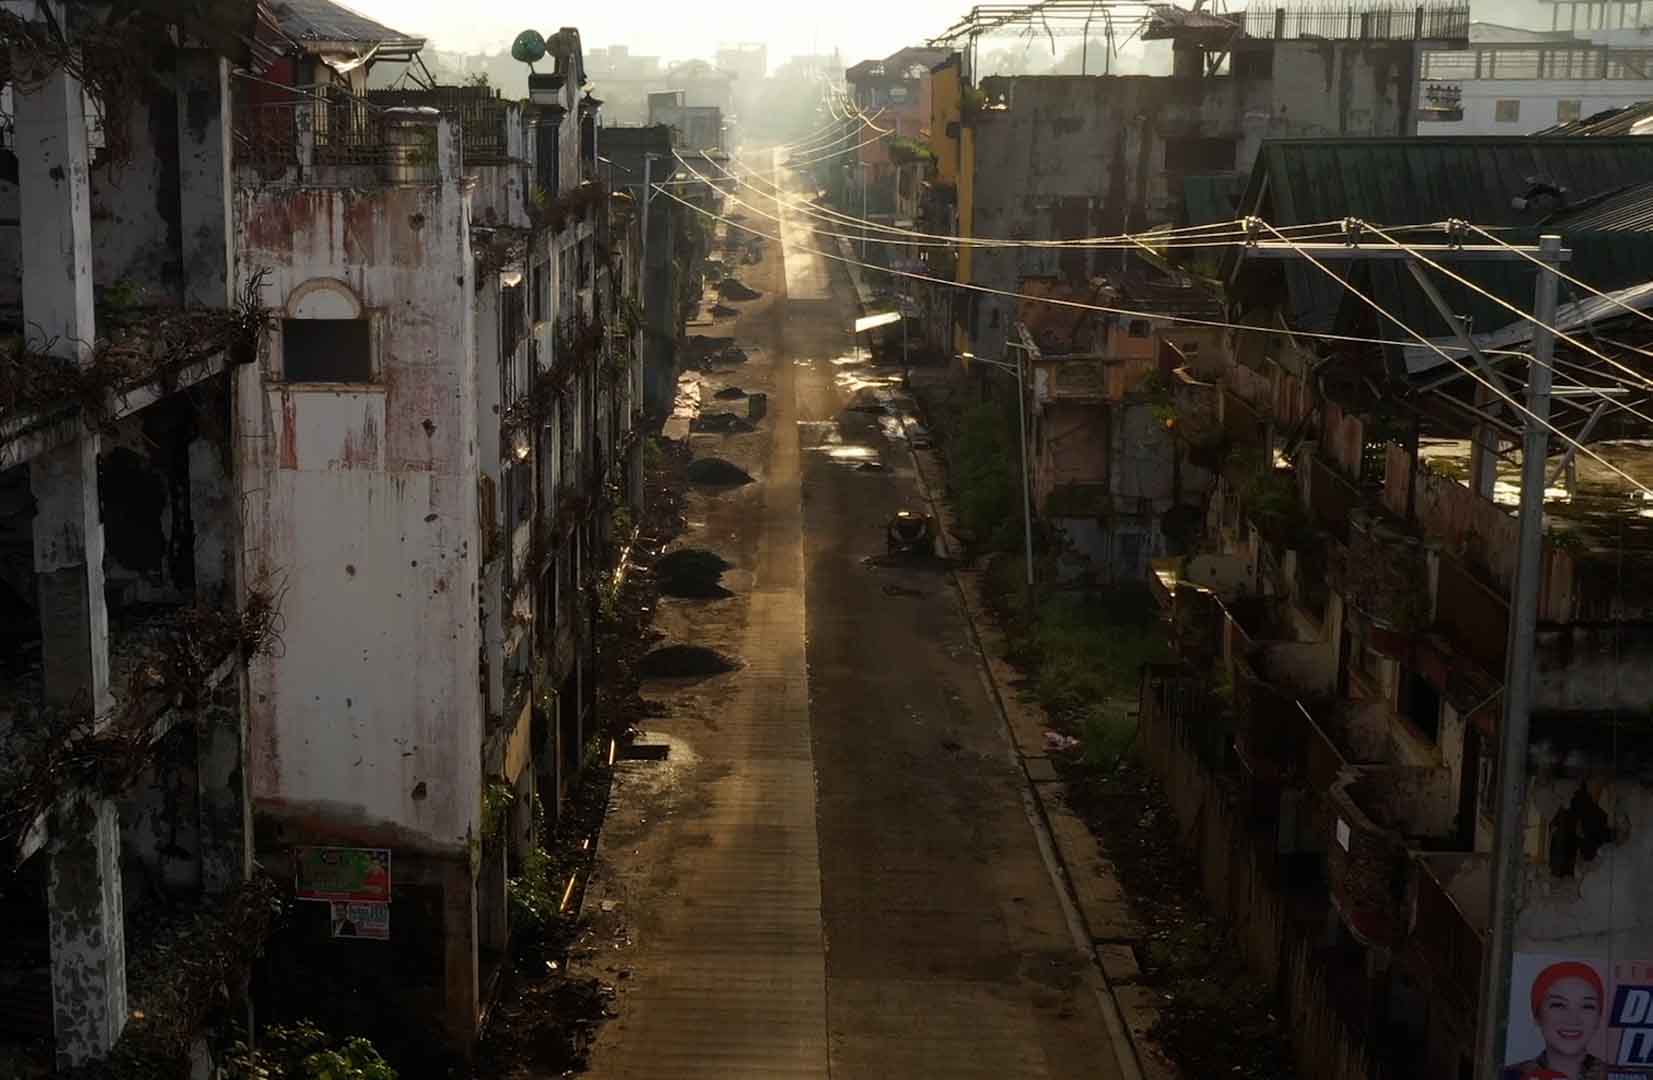 Six years after the siege, which displaced nearly everyone in the city, Marawi remains a ghost town.